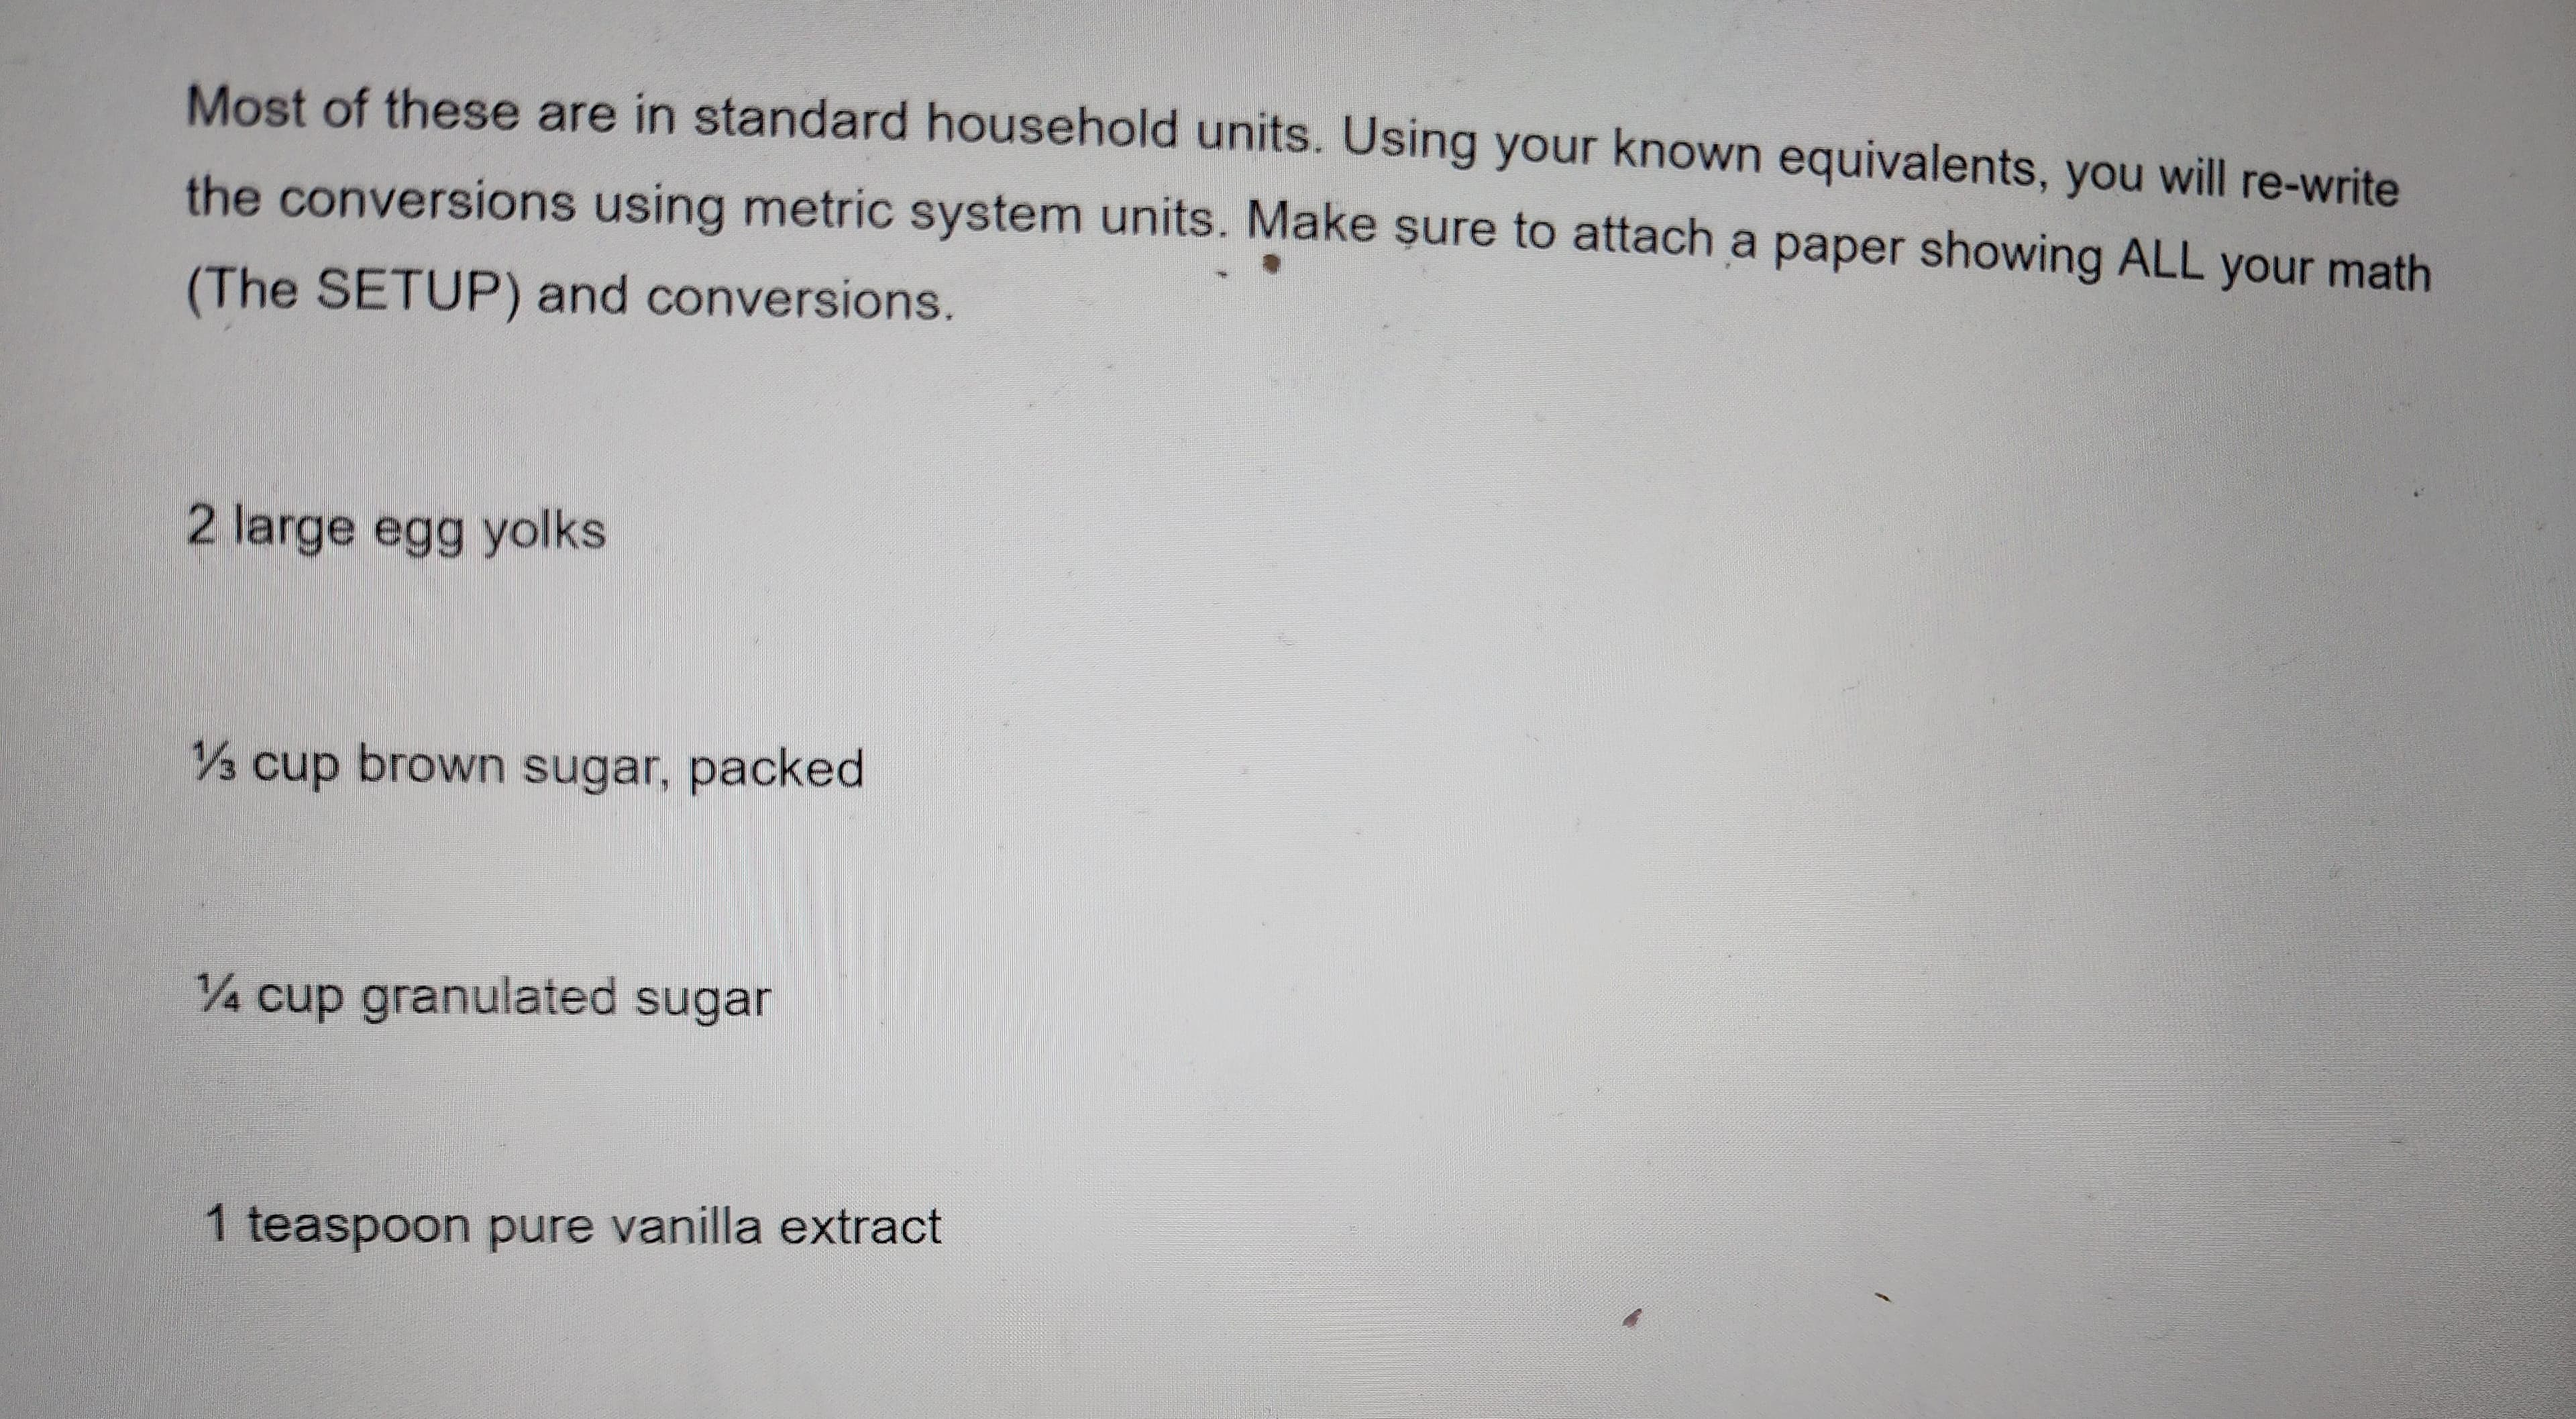 Most of these are in standard household units. Using your known equivalents, you will re-write
the conversions using metric system units. Make sure to attach a paper showing ALL your math
(The SETUP) and conversions.
2 large egg yolks
1/3 cup brown sugar, packed
1/4 cup granulated sugar
1 teaspoon pure vanilla extract